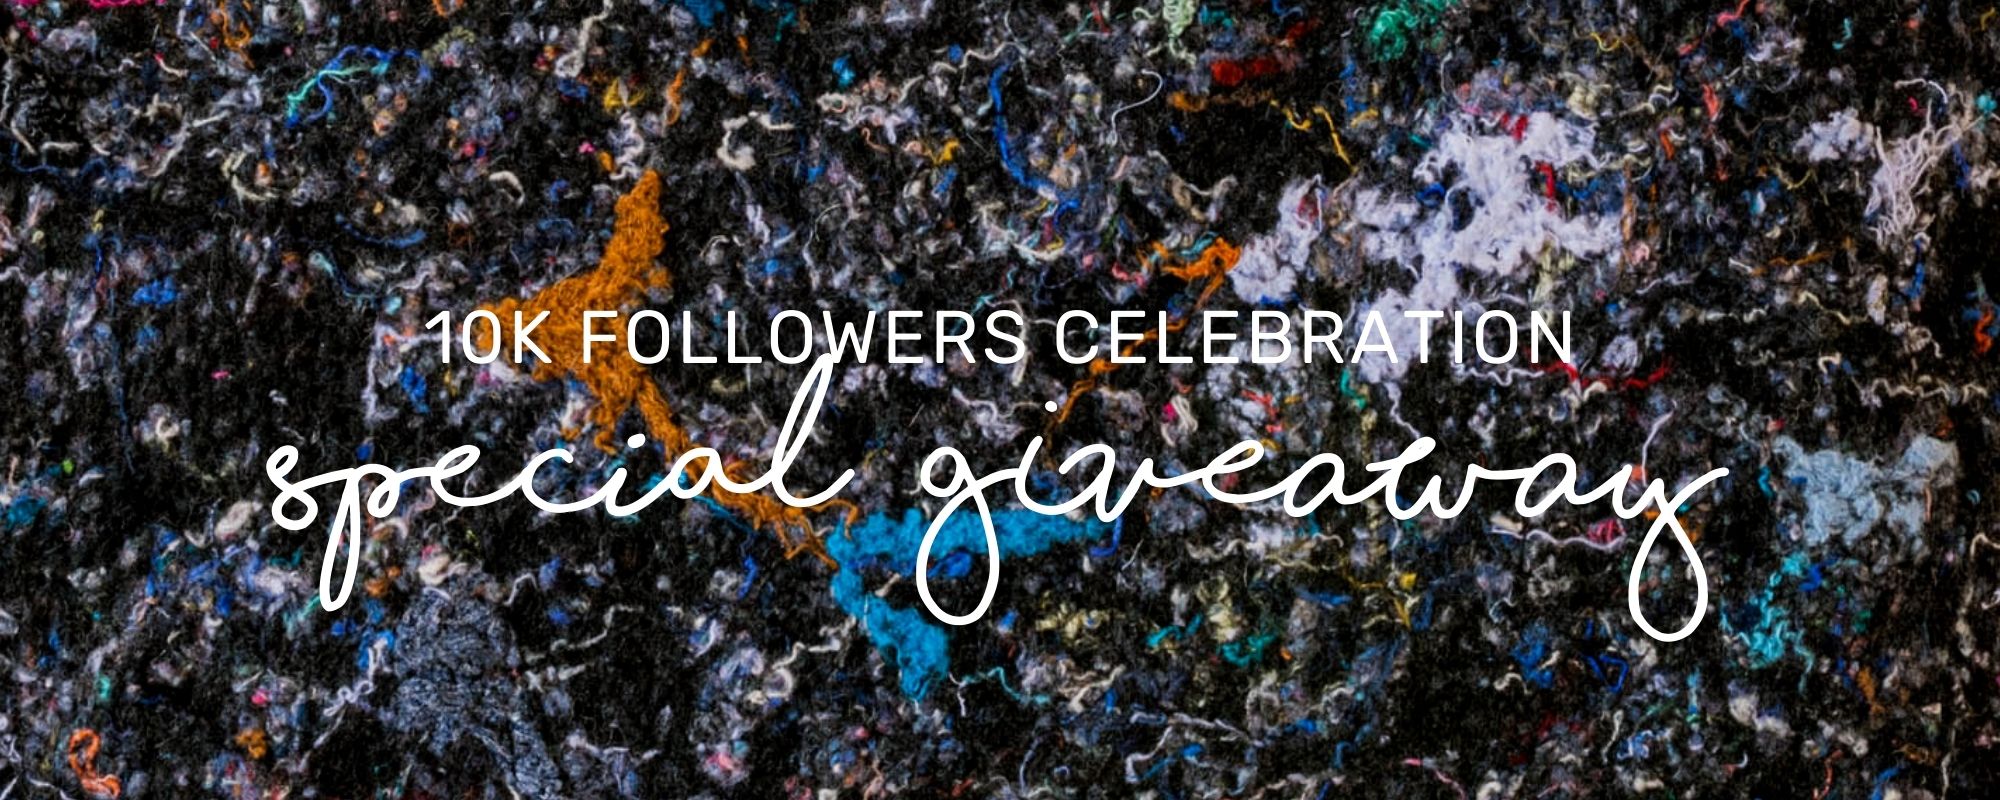 SPECIAL GIVEAWAY: 10K FOLLOWERS CELEBRATION